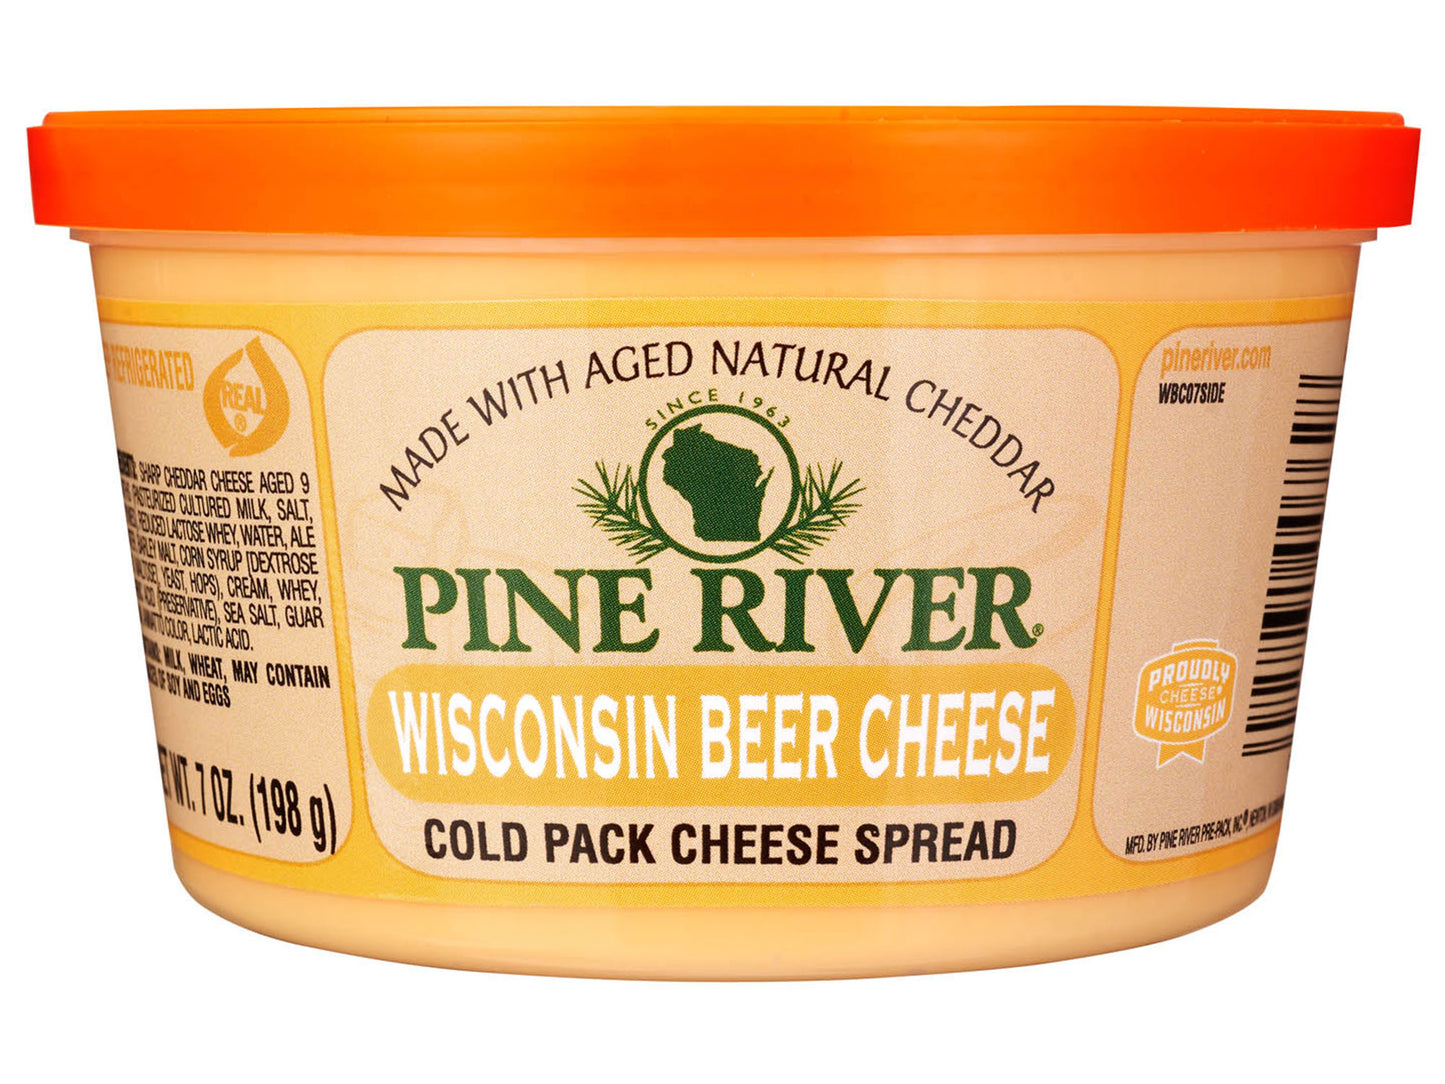 7 ounce plastic cup of yellow Wisconsin Beer Cheese cheese spread